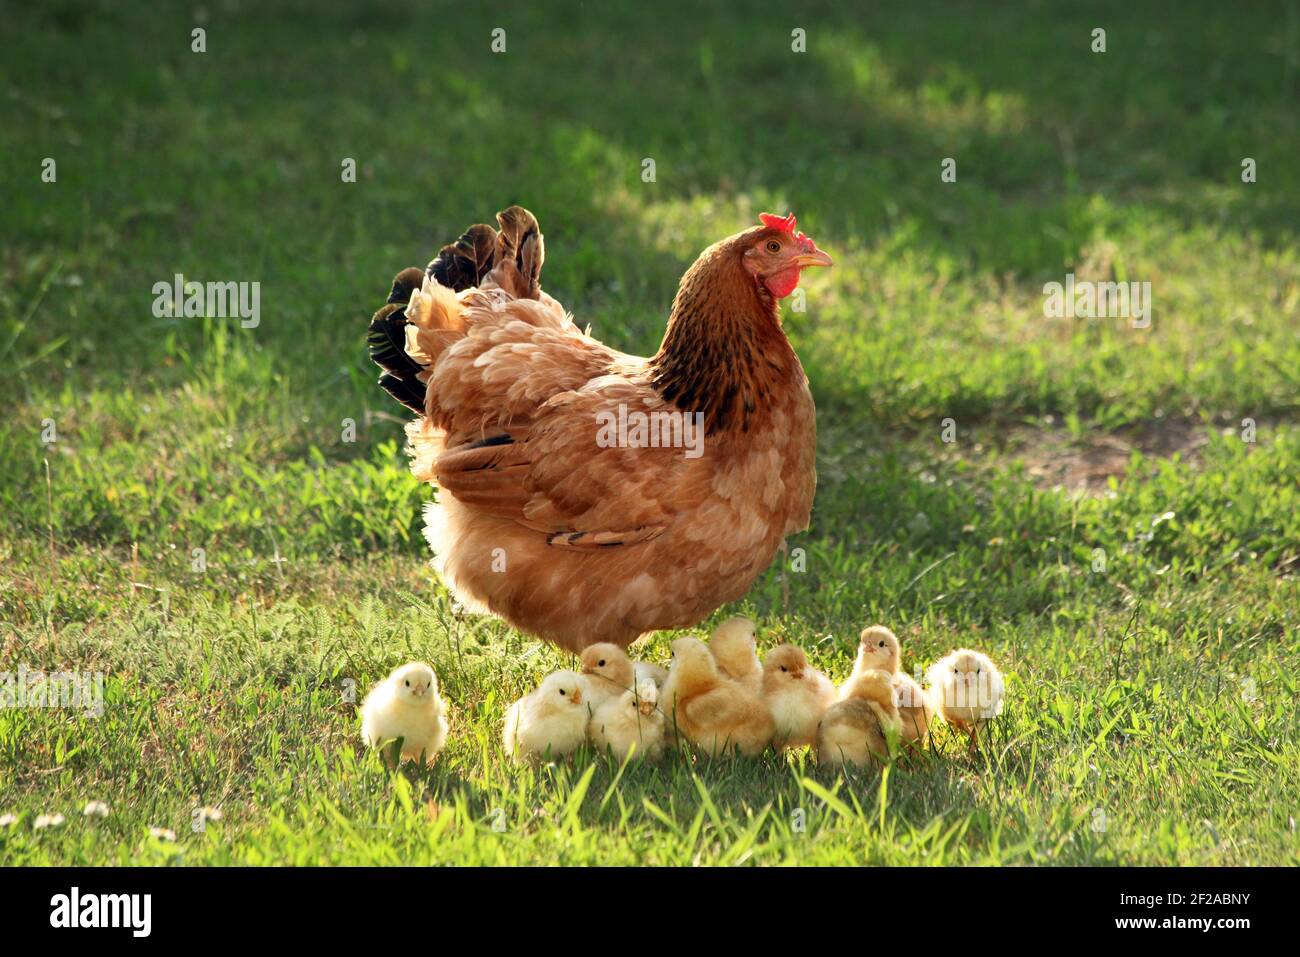 Mother hen with chickens in a rural yard.Chickens in a grass in